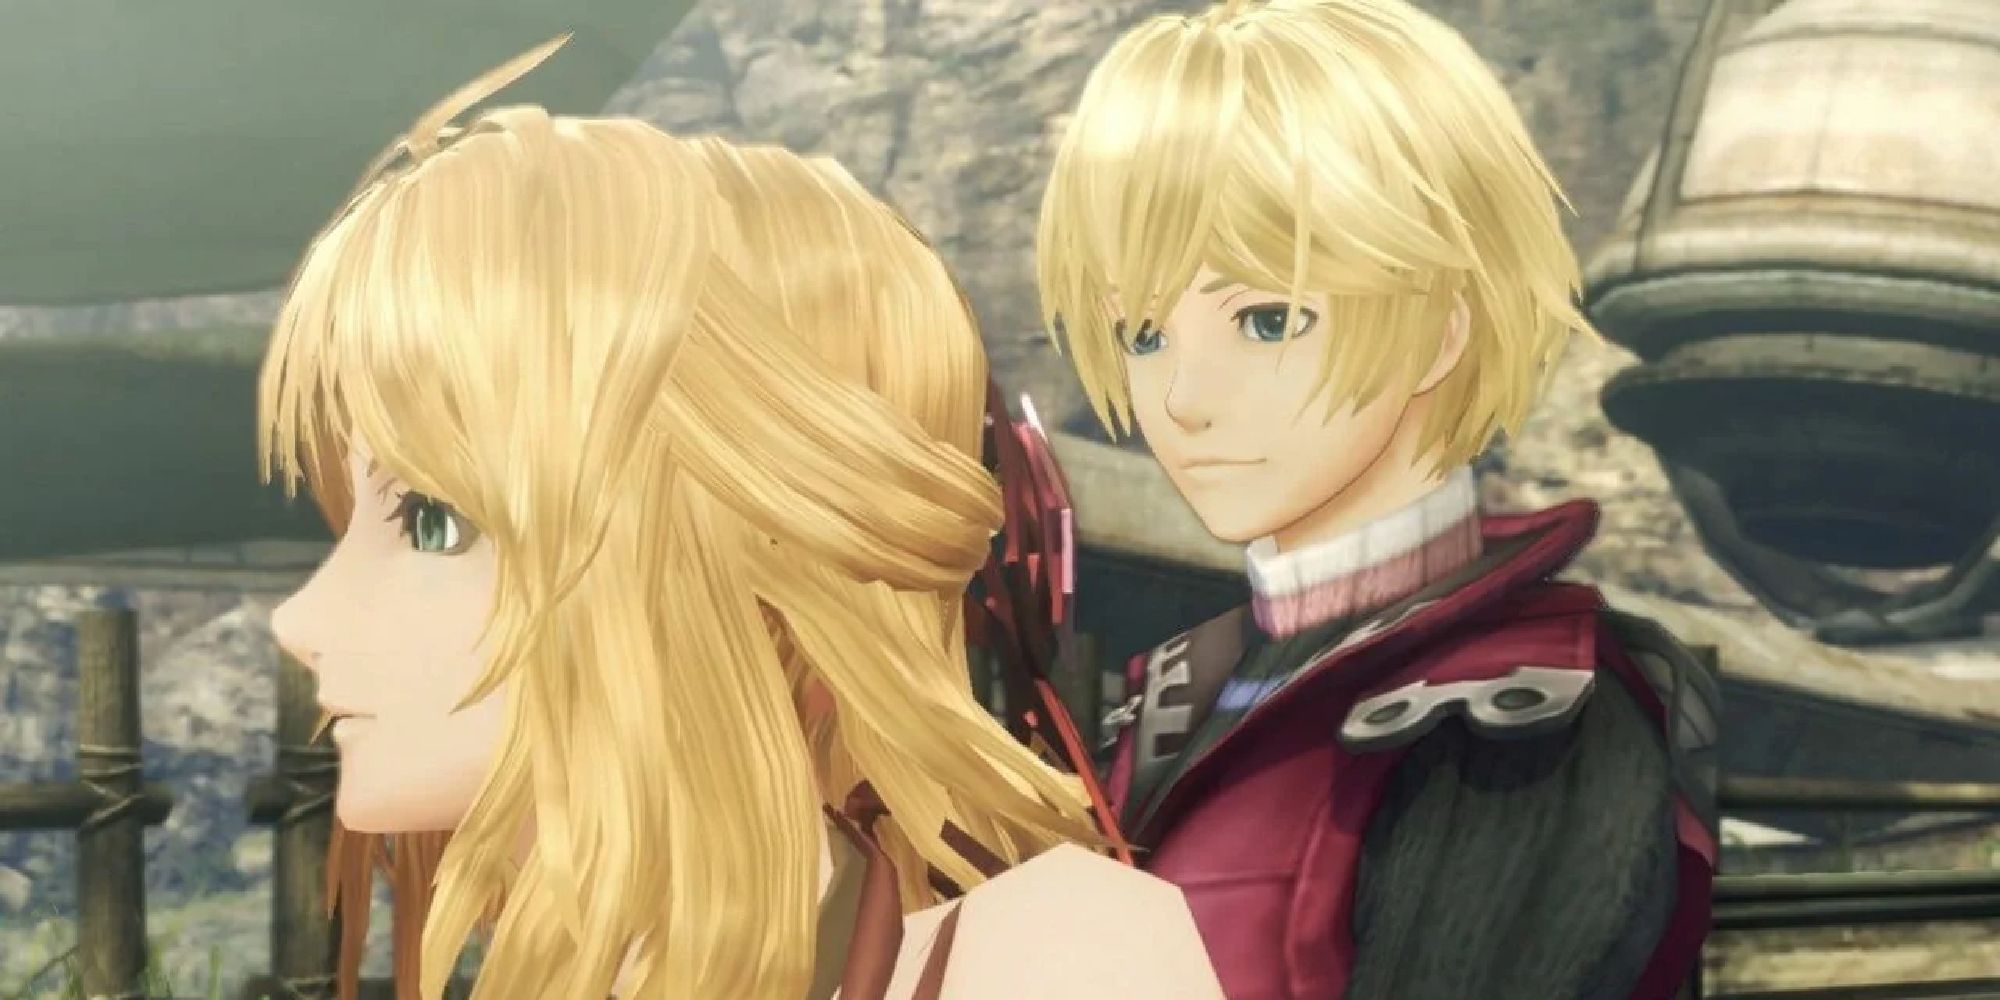 Shulk staring at Fiora in a cutscene from Xenoblade Chronicles